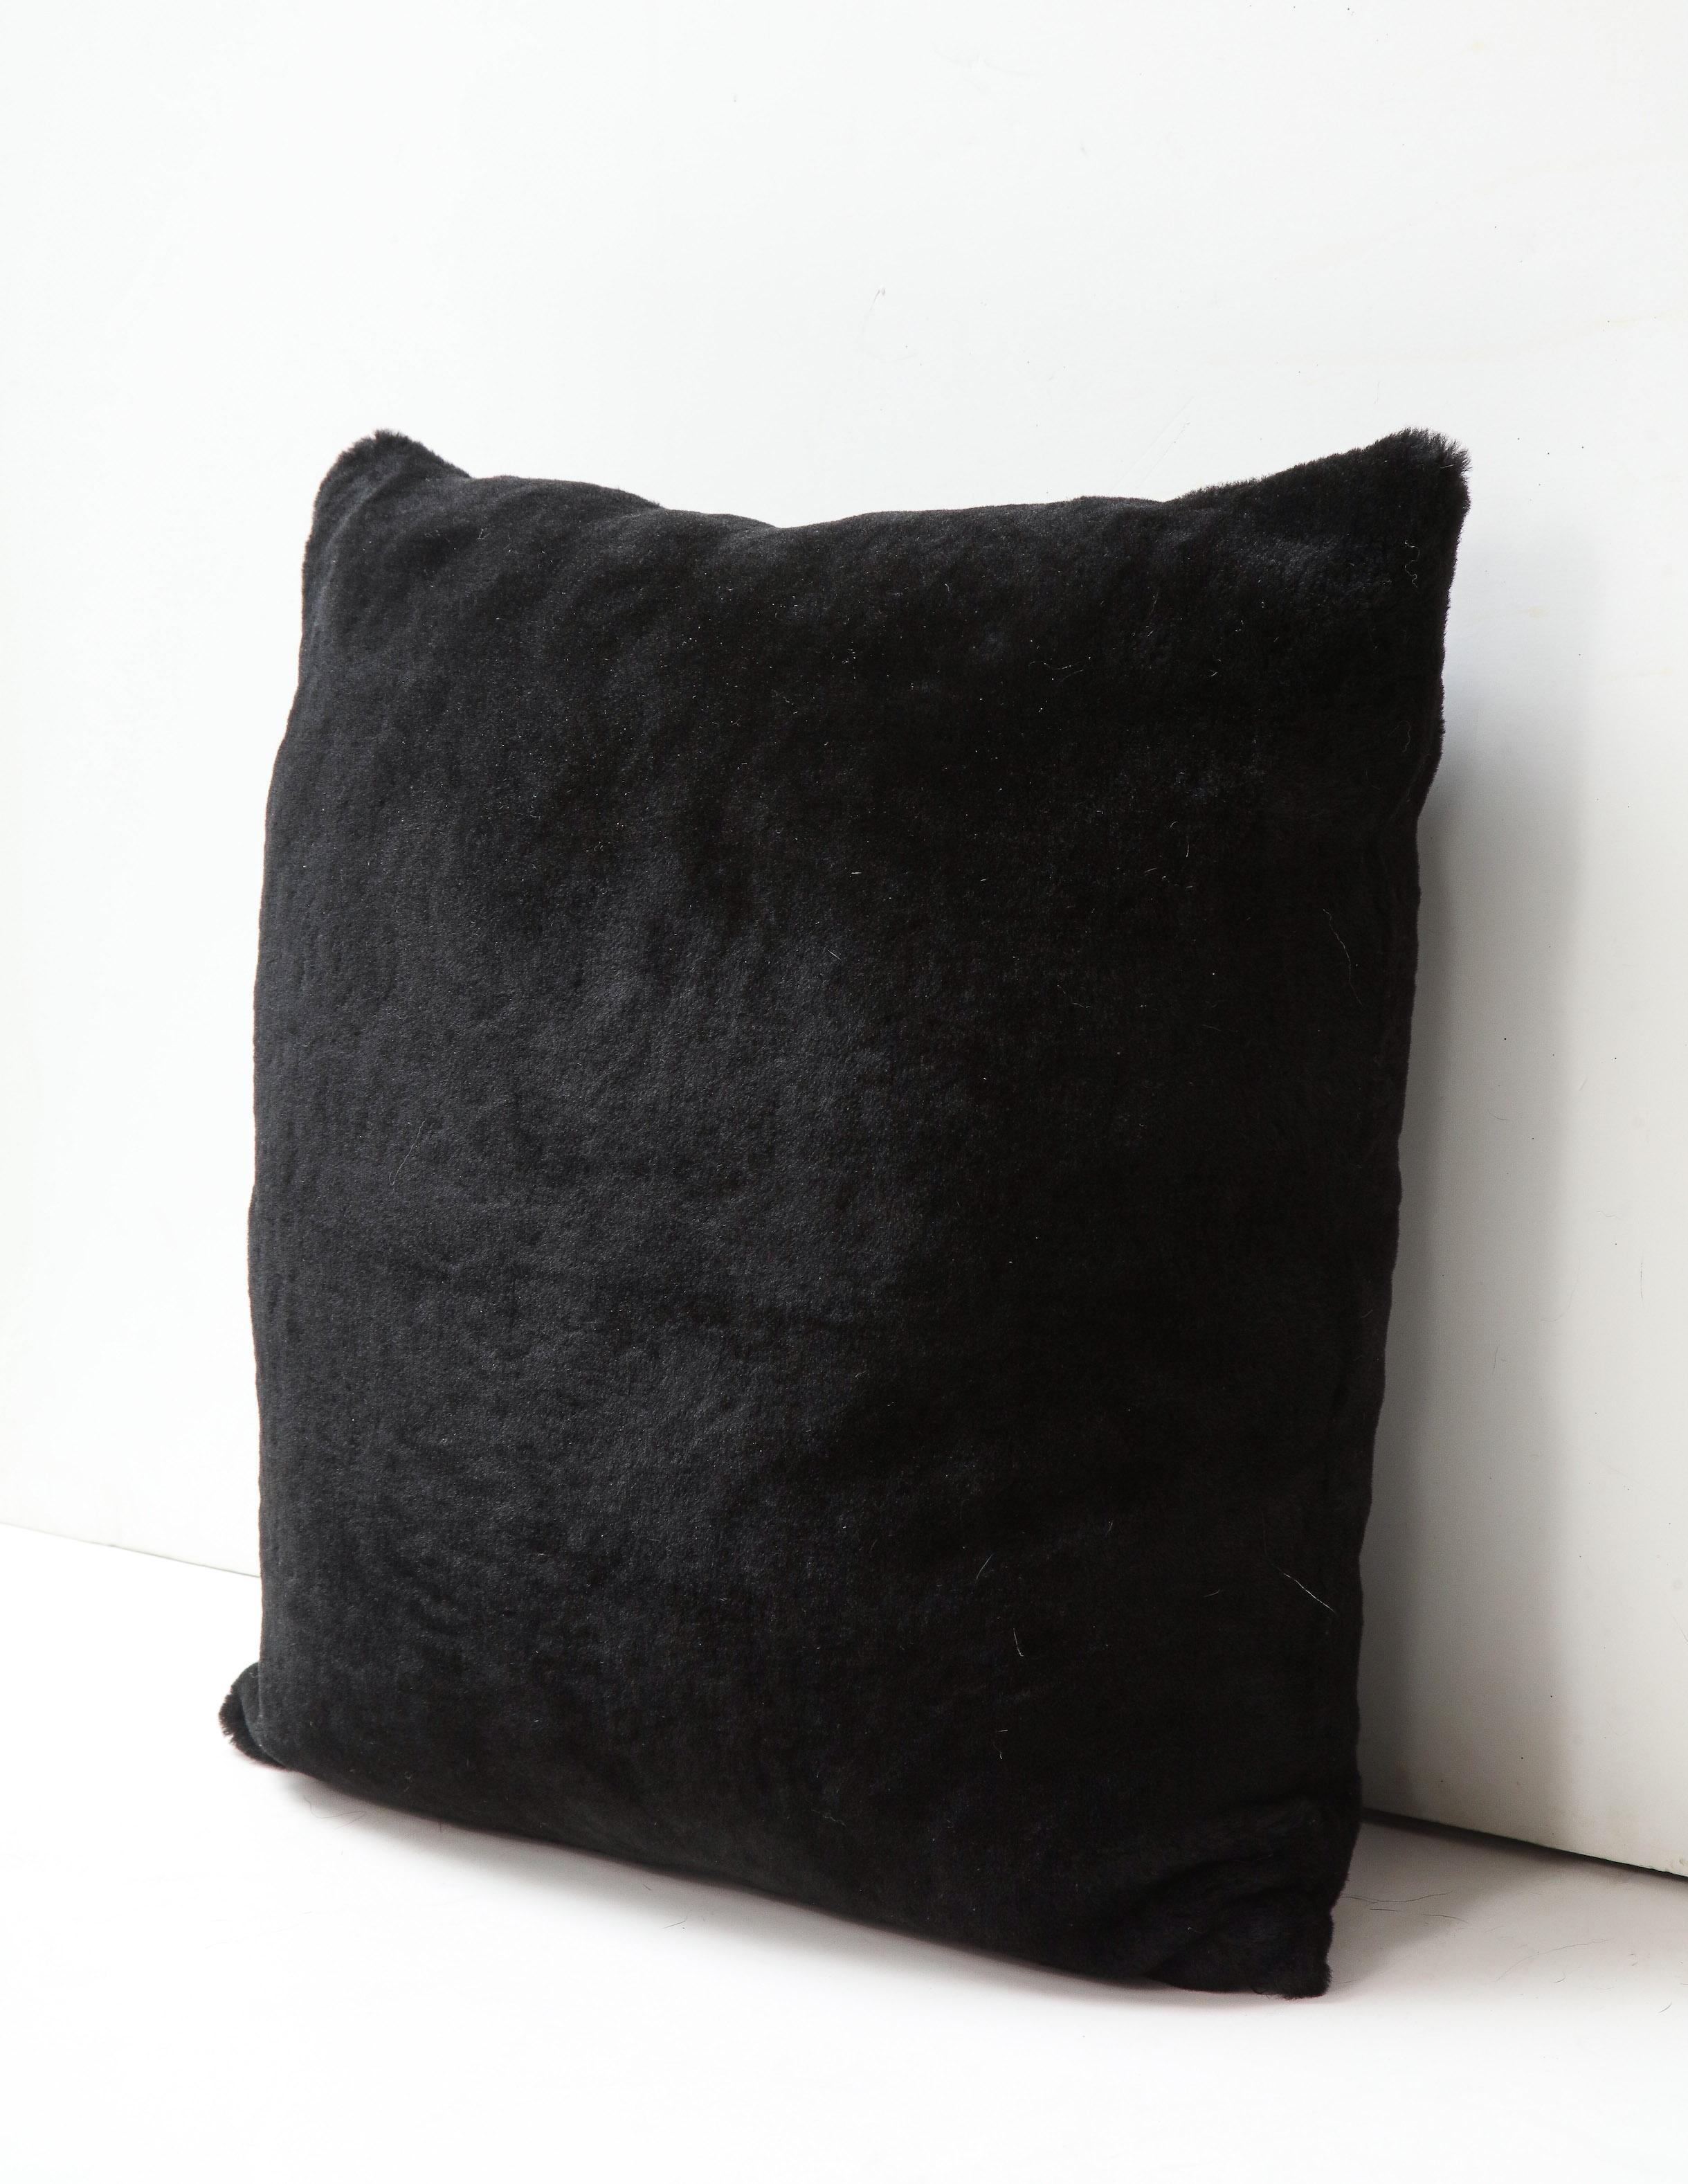 Beautiful custom double sided short hair Merino shearling pillow in black color. Very soft and luxurious in touch with modern appeal. It is made of genuine shearing with a zipper enclosure in a matching color, filled with down and feather, and 18